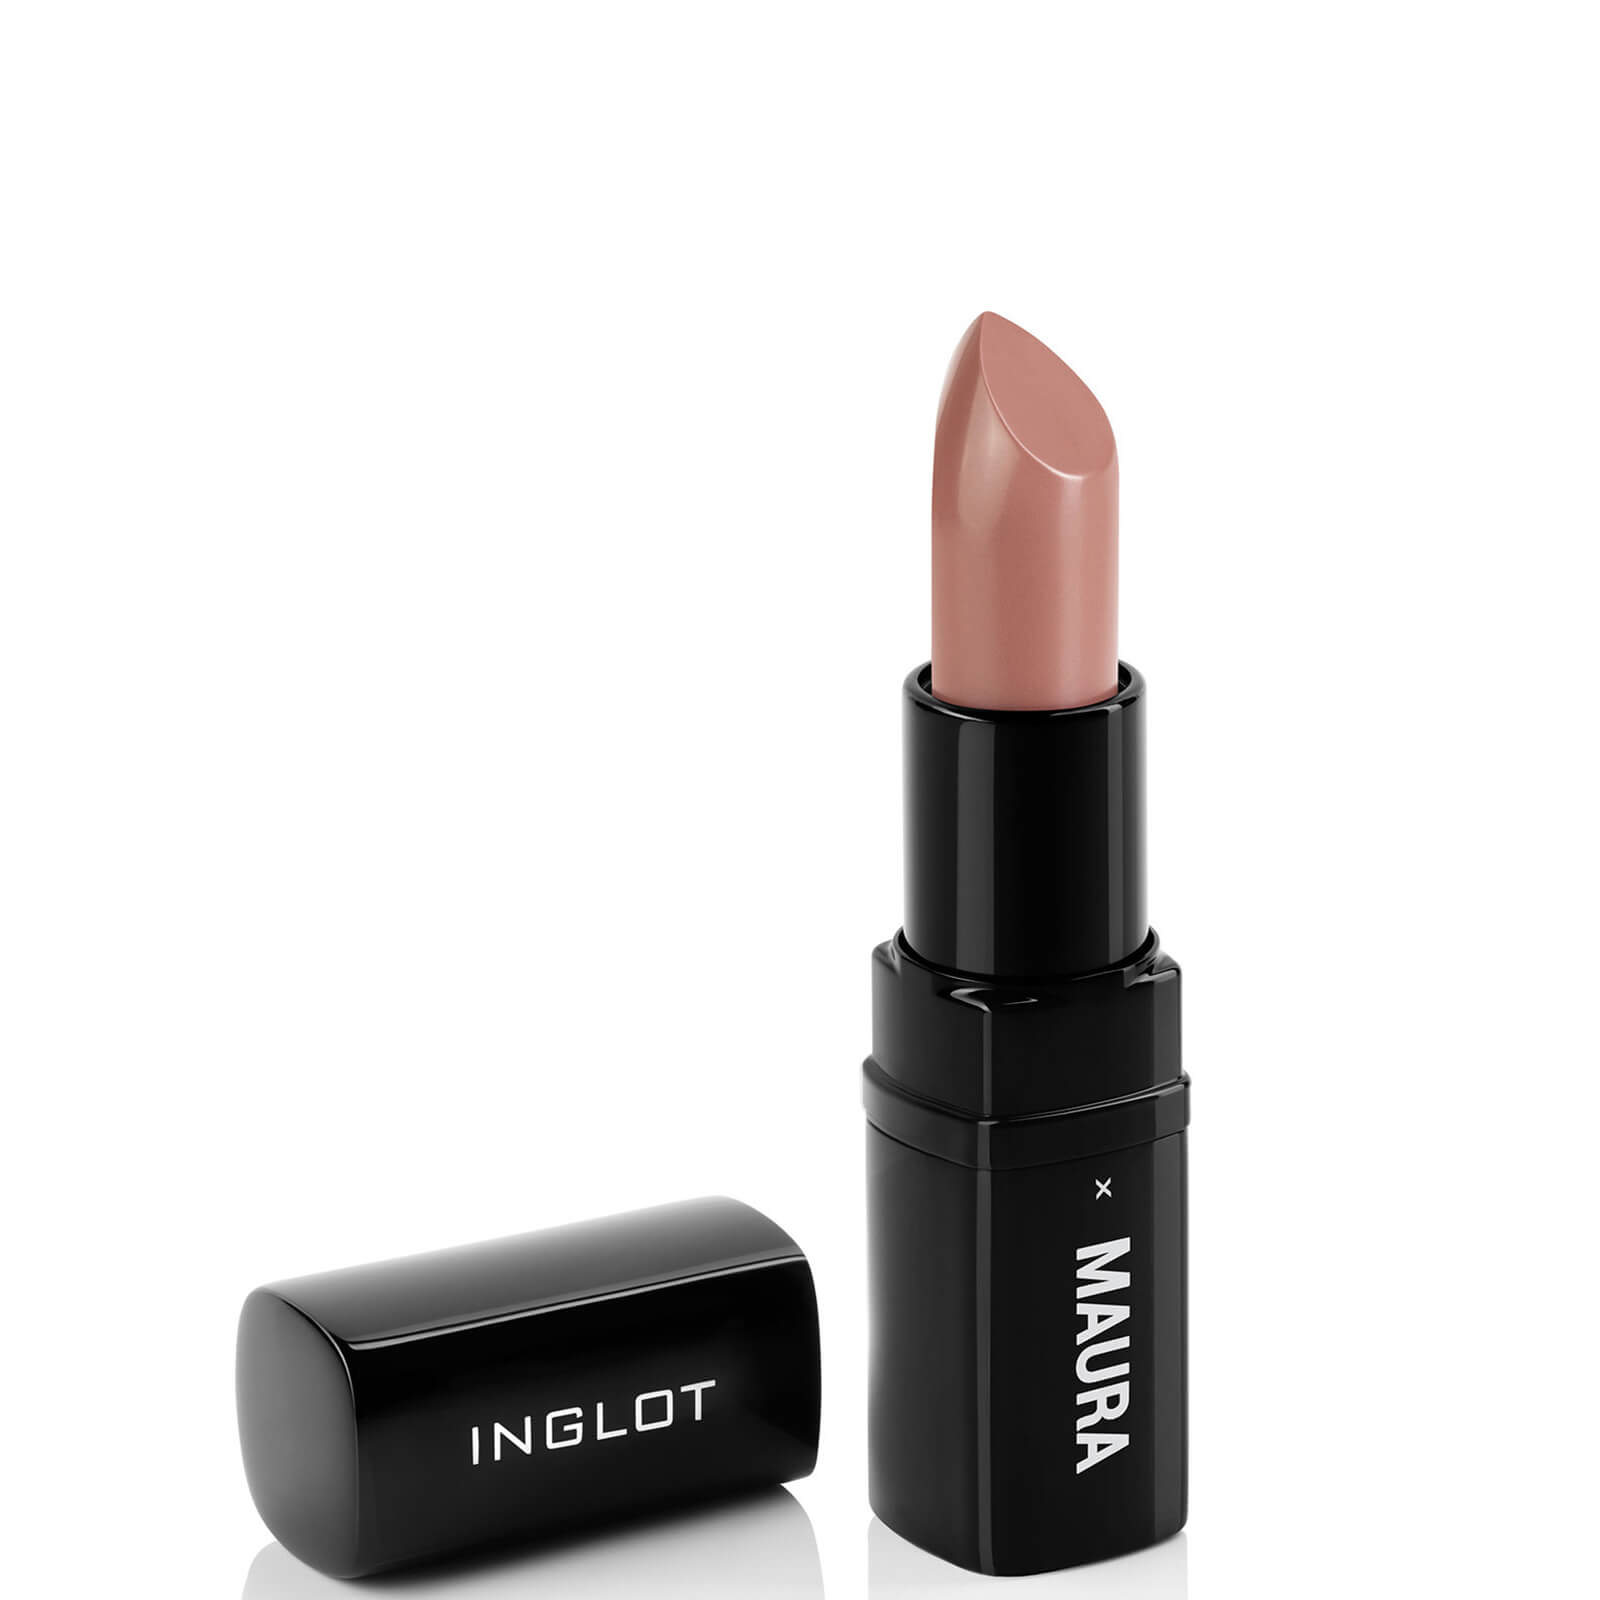 Inglot X Maura Naughty Nudes Lipstain Lipstick 4.5ml (Various Shades) - Dream Queen